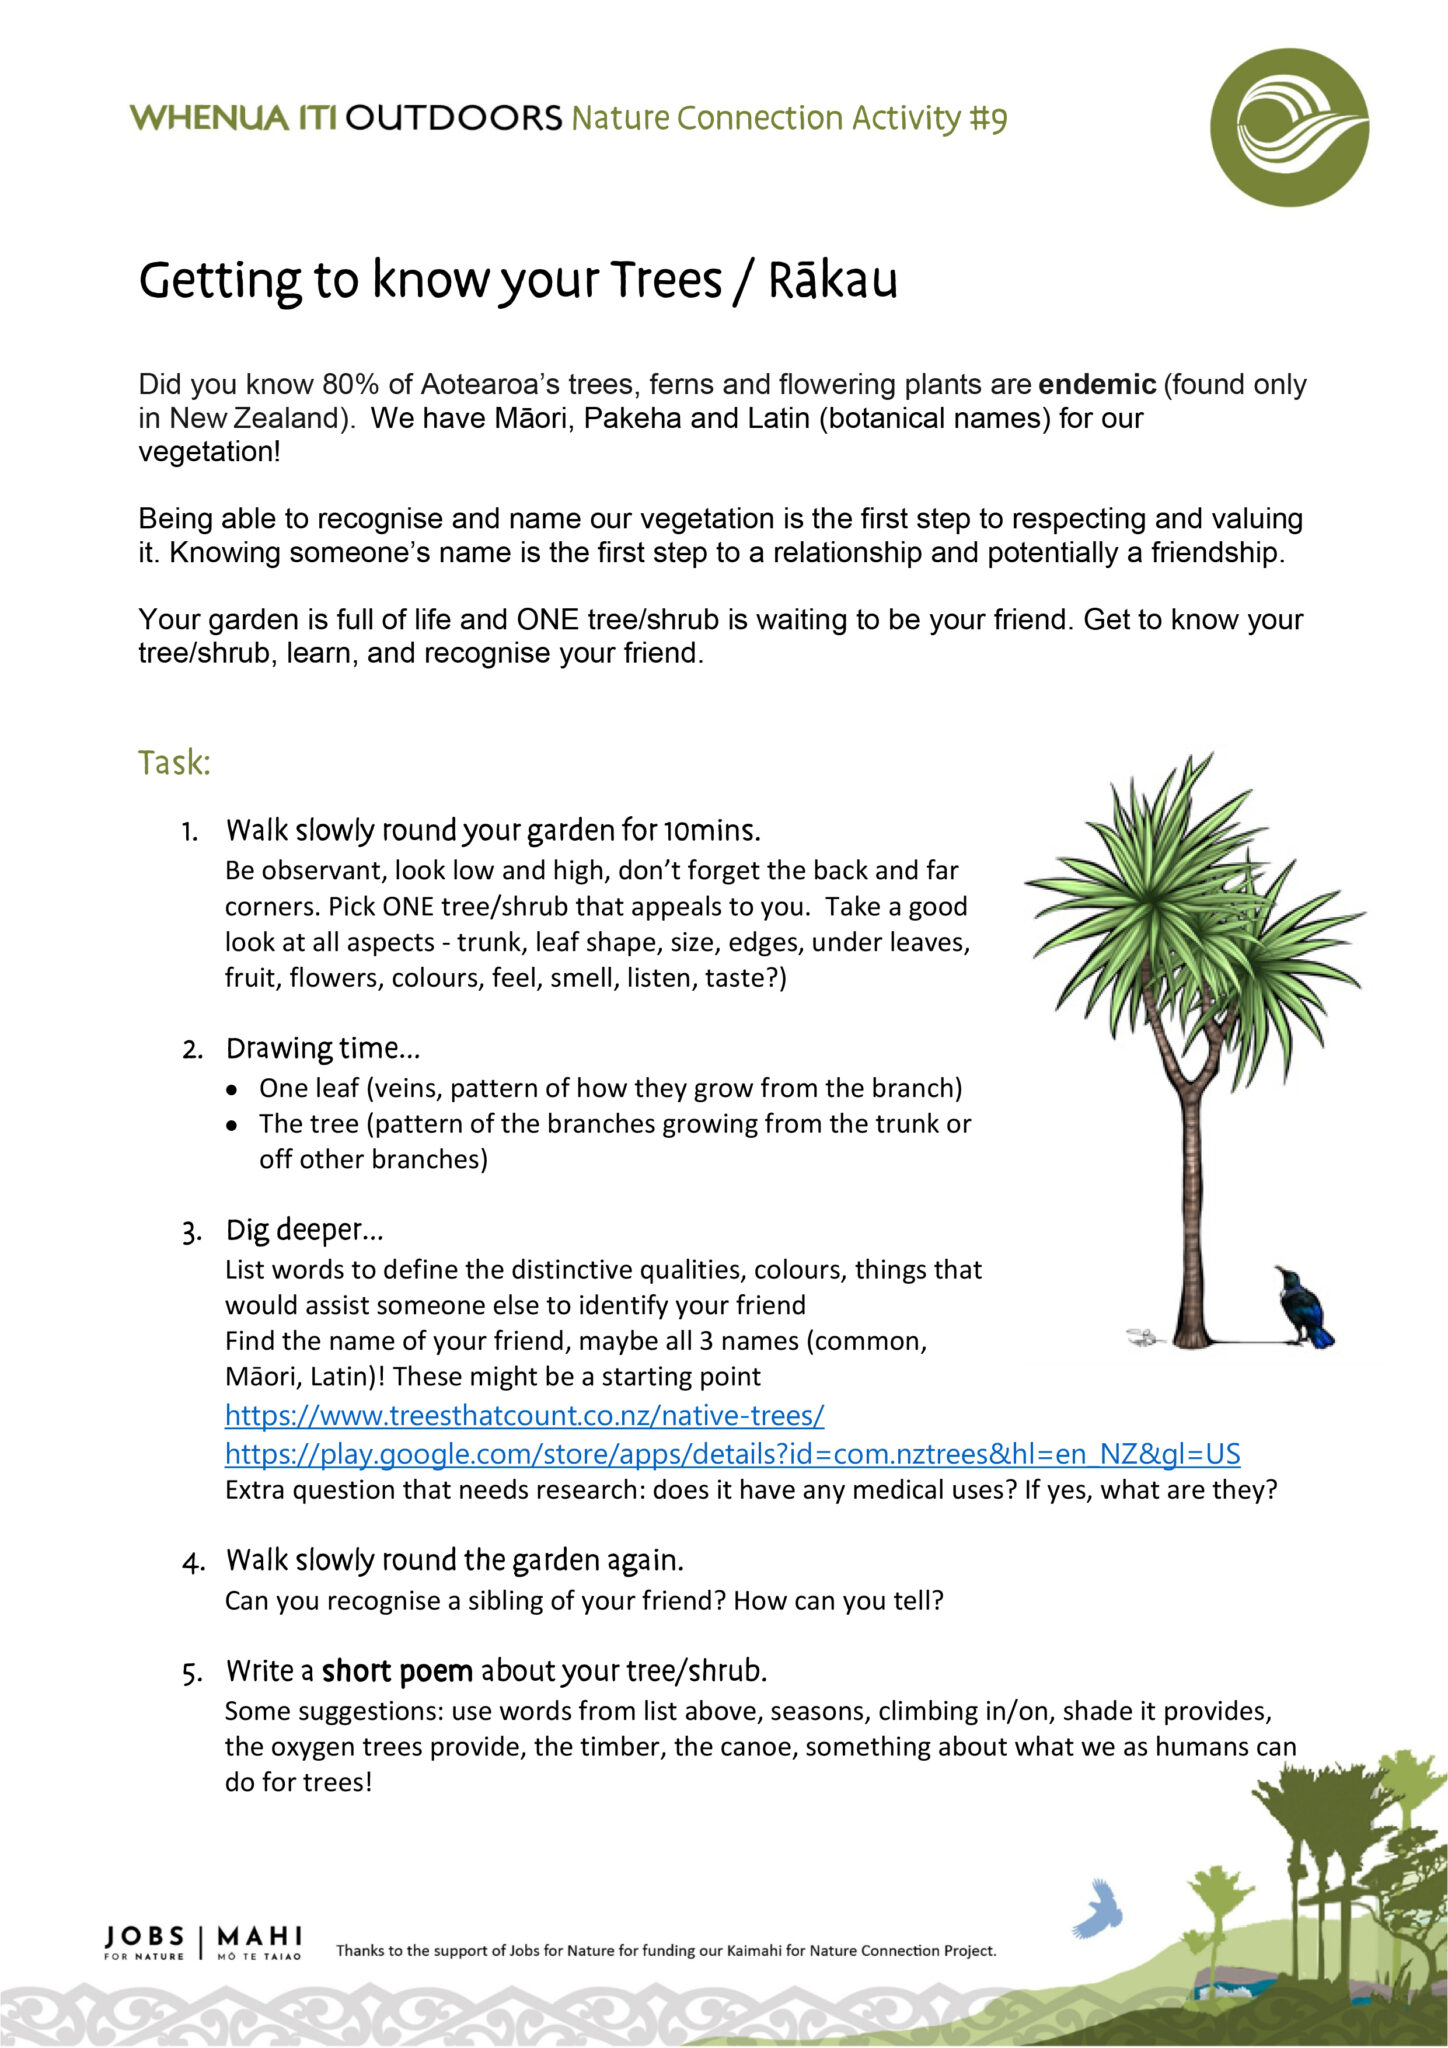 WIO Activity #9 Get to know your trees